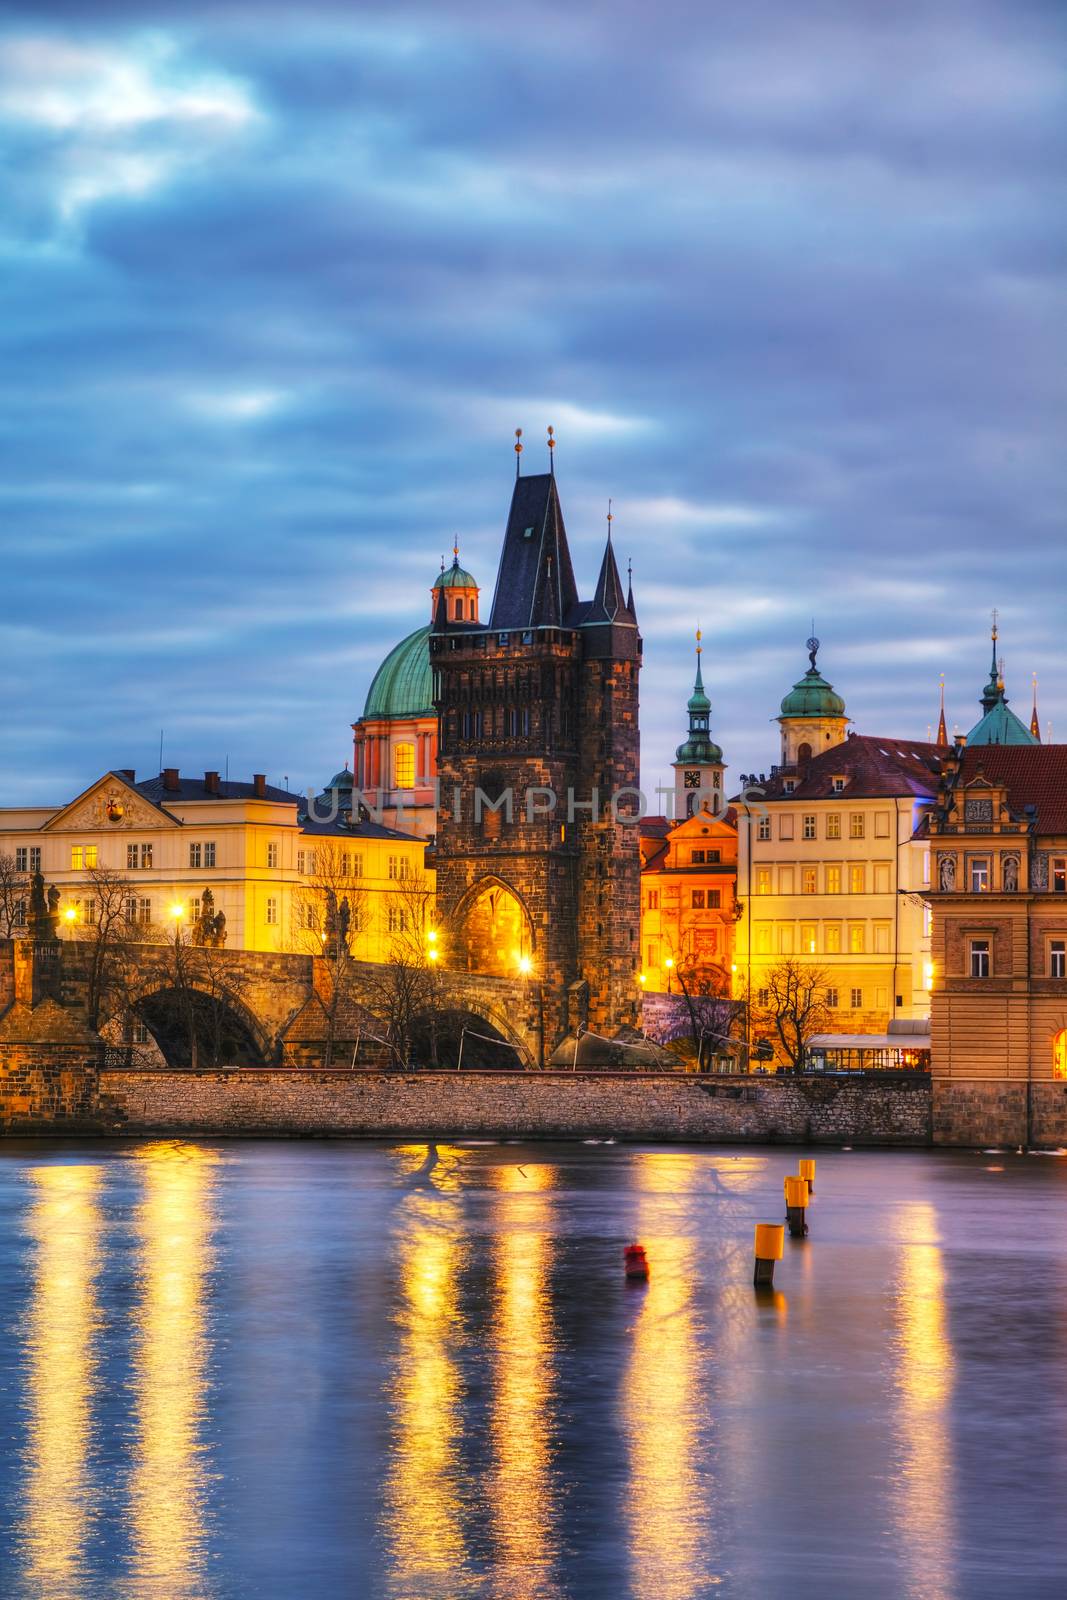 Overview of Prague, Czech Republic in the morning